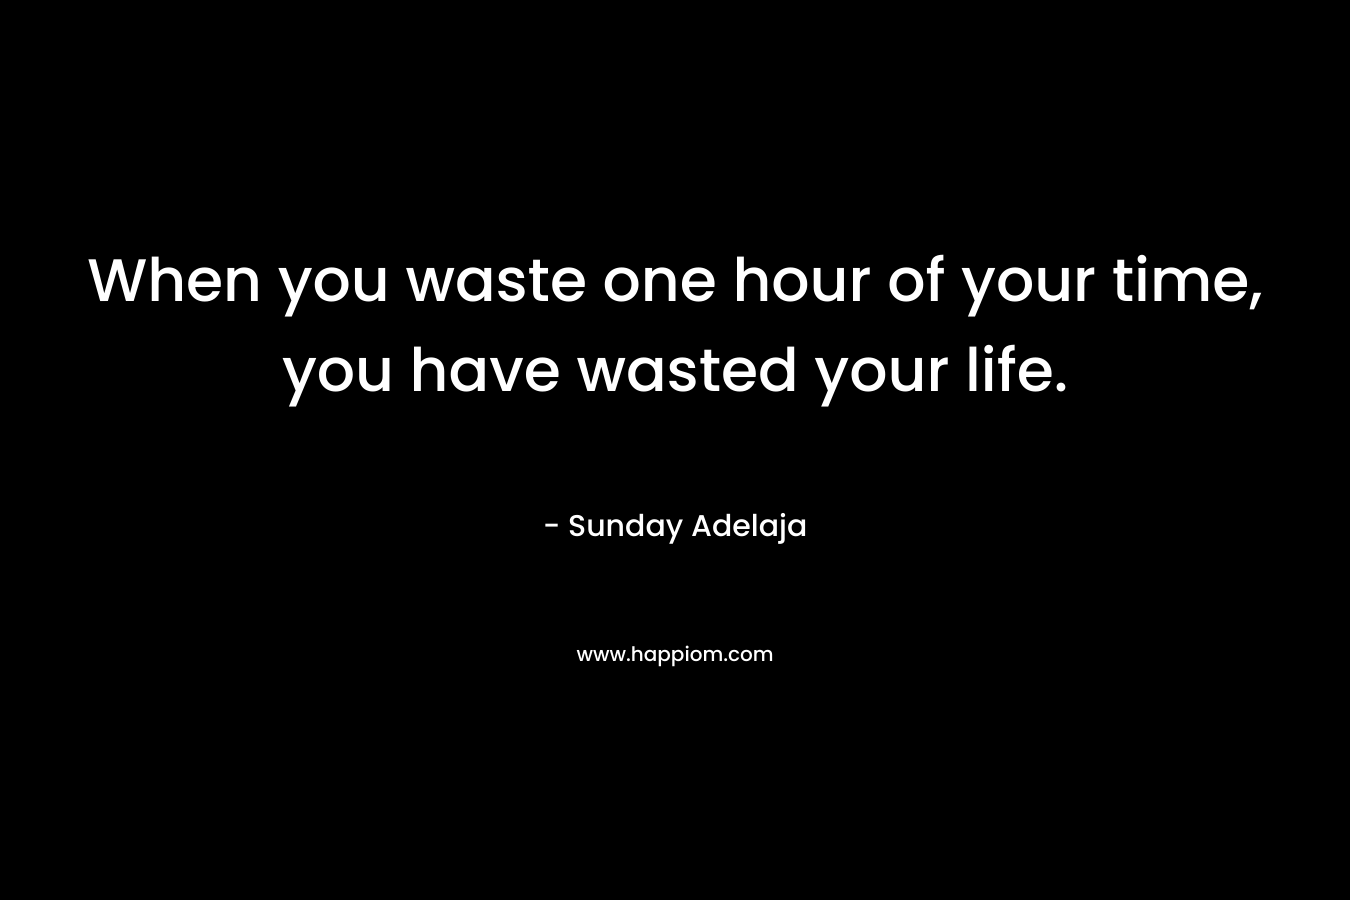 When you waste one hour of your time, you have wasted your life.